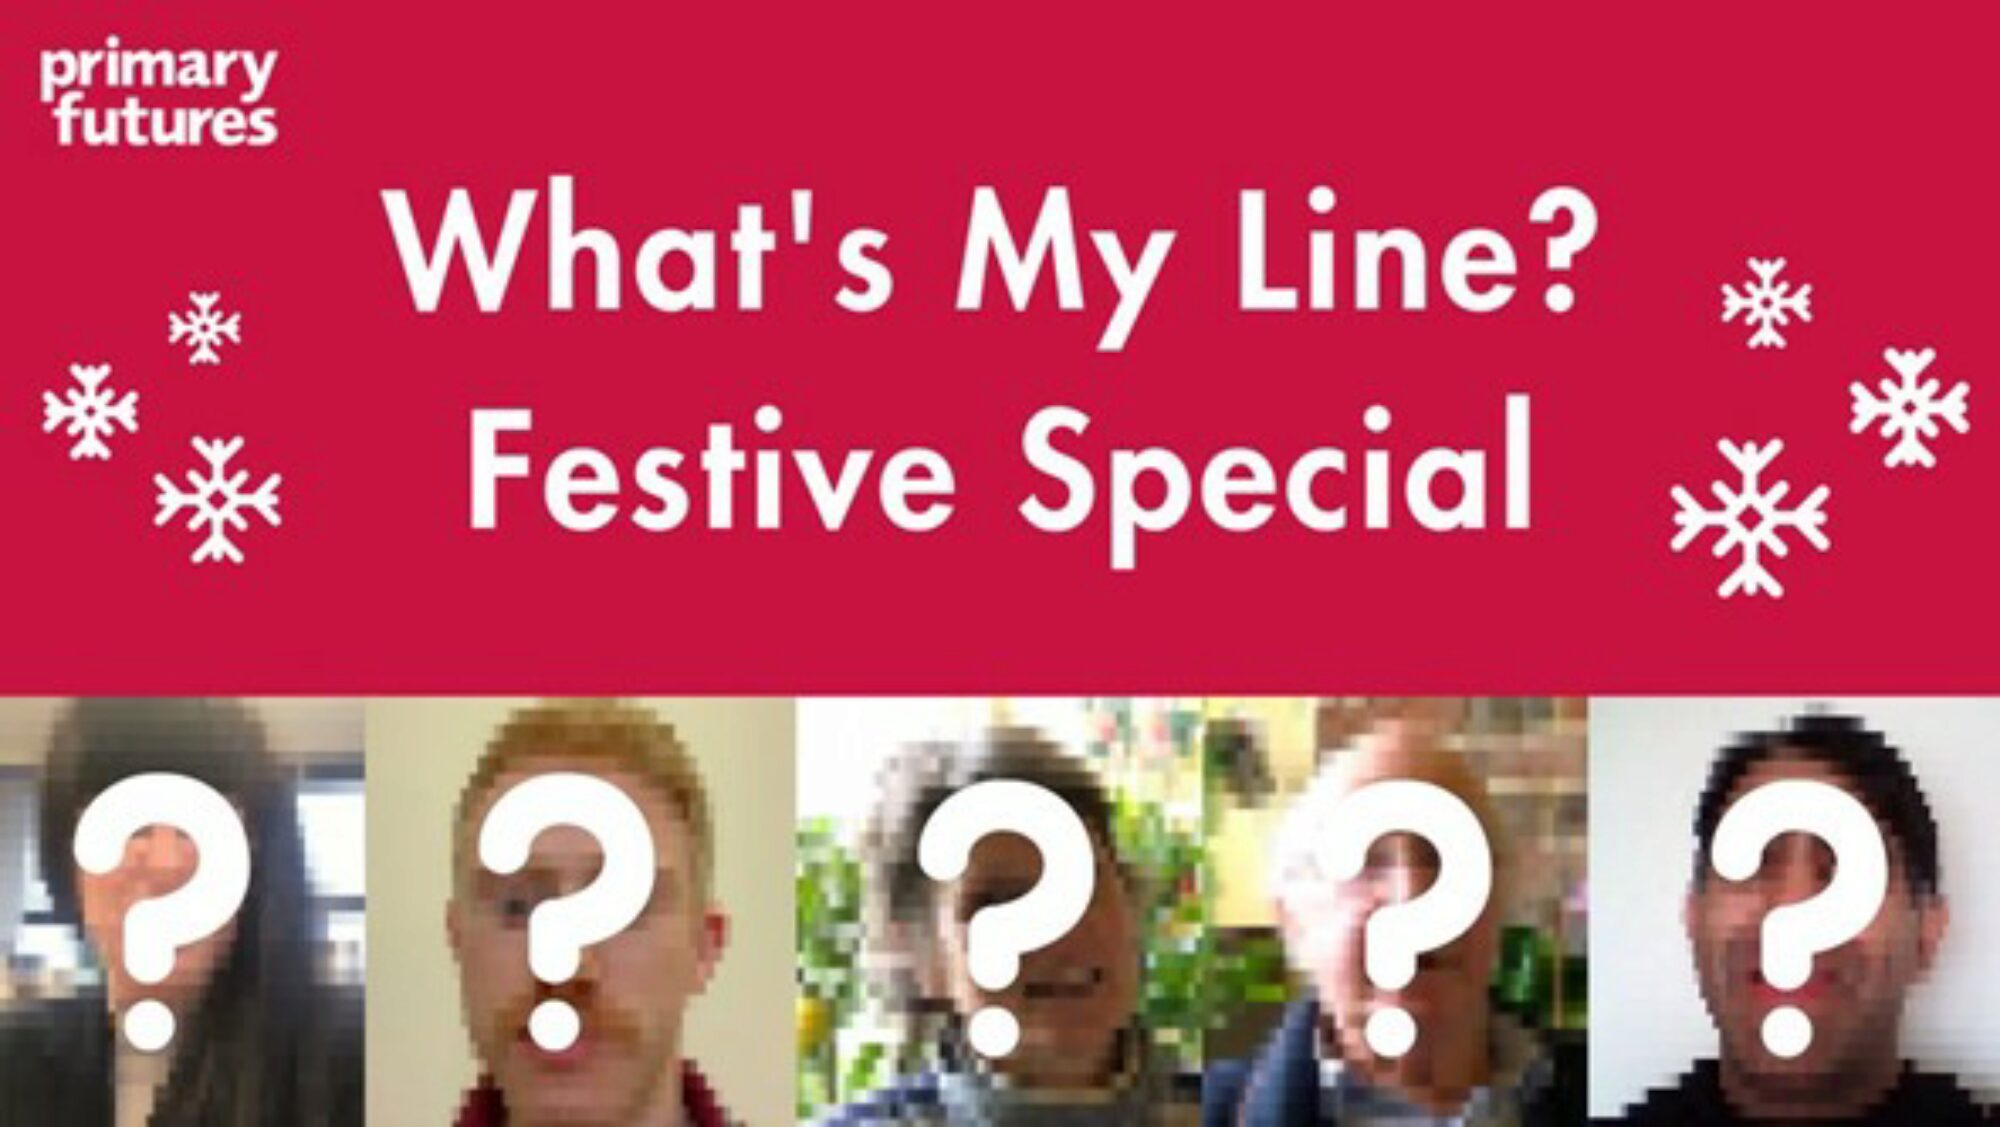 Festive Special ‘What’s My Line?’ pre-recorded resource (KS2)